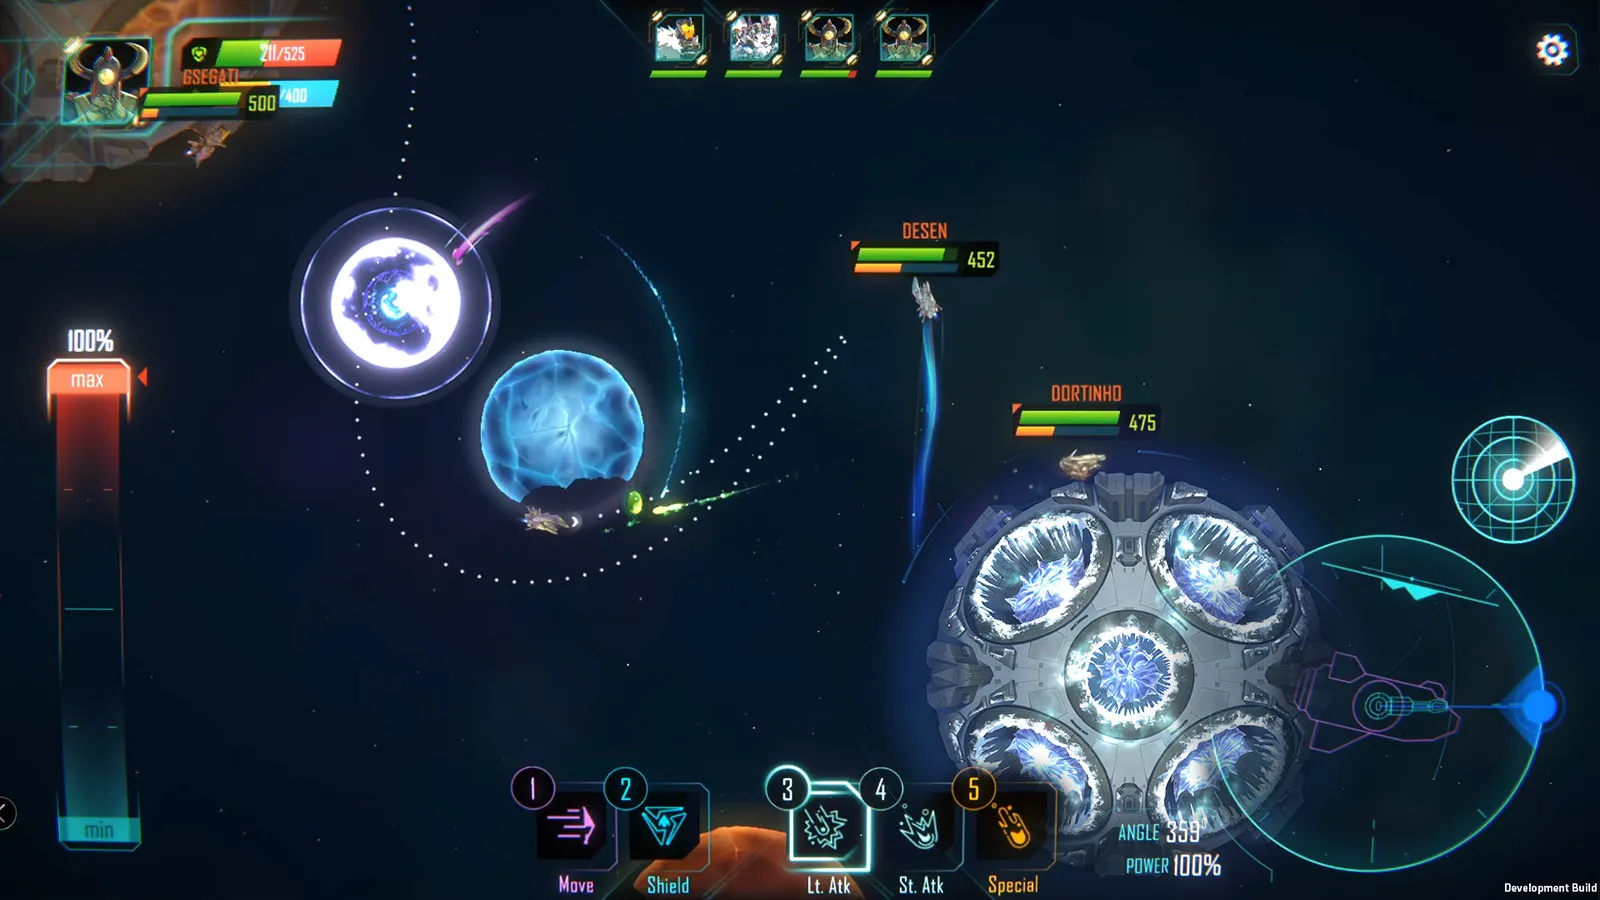 The image shows the gameplay of Space Mavericks, with commanders in their spaceships aiming and fighting against each other to be the last one standing.